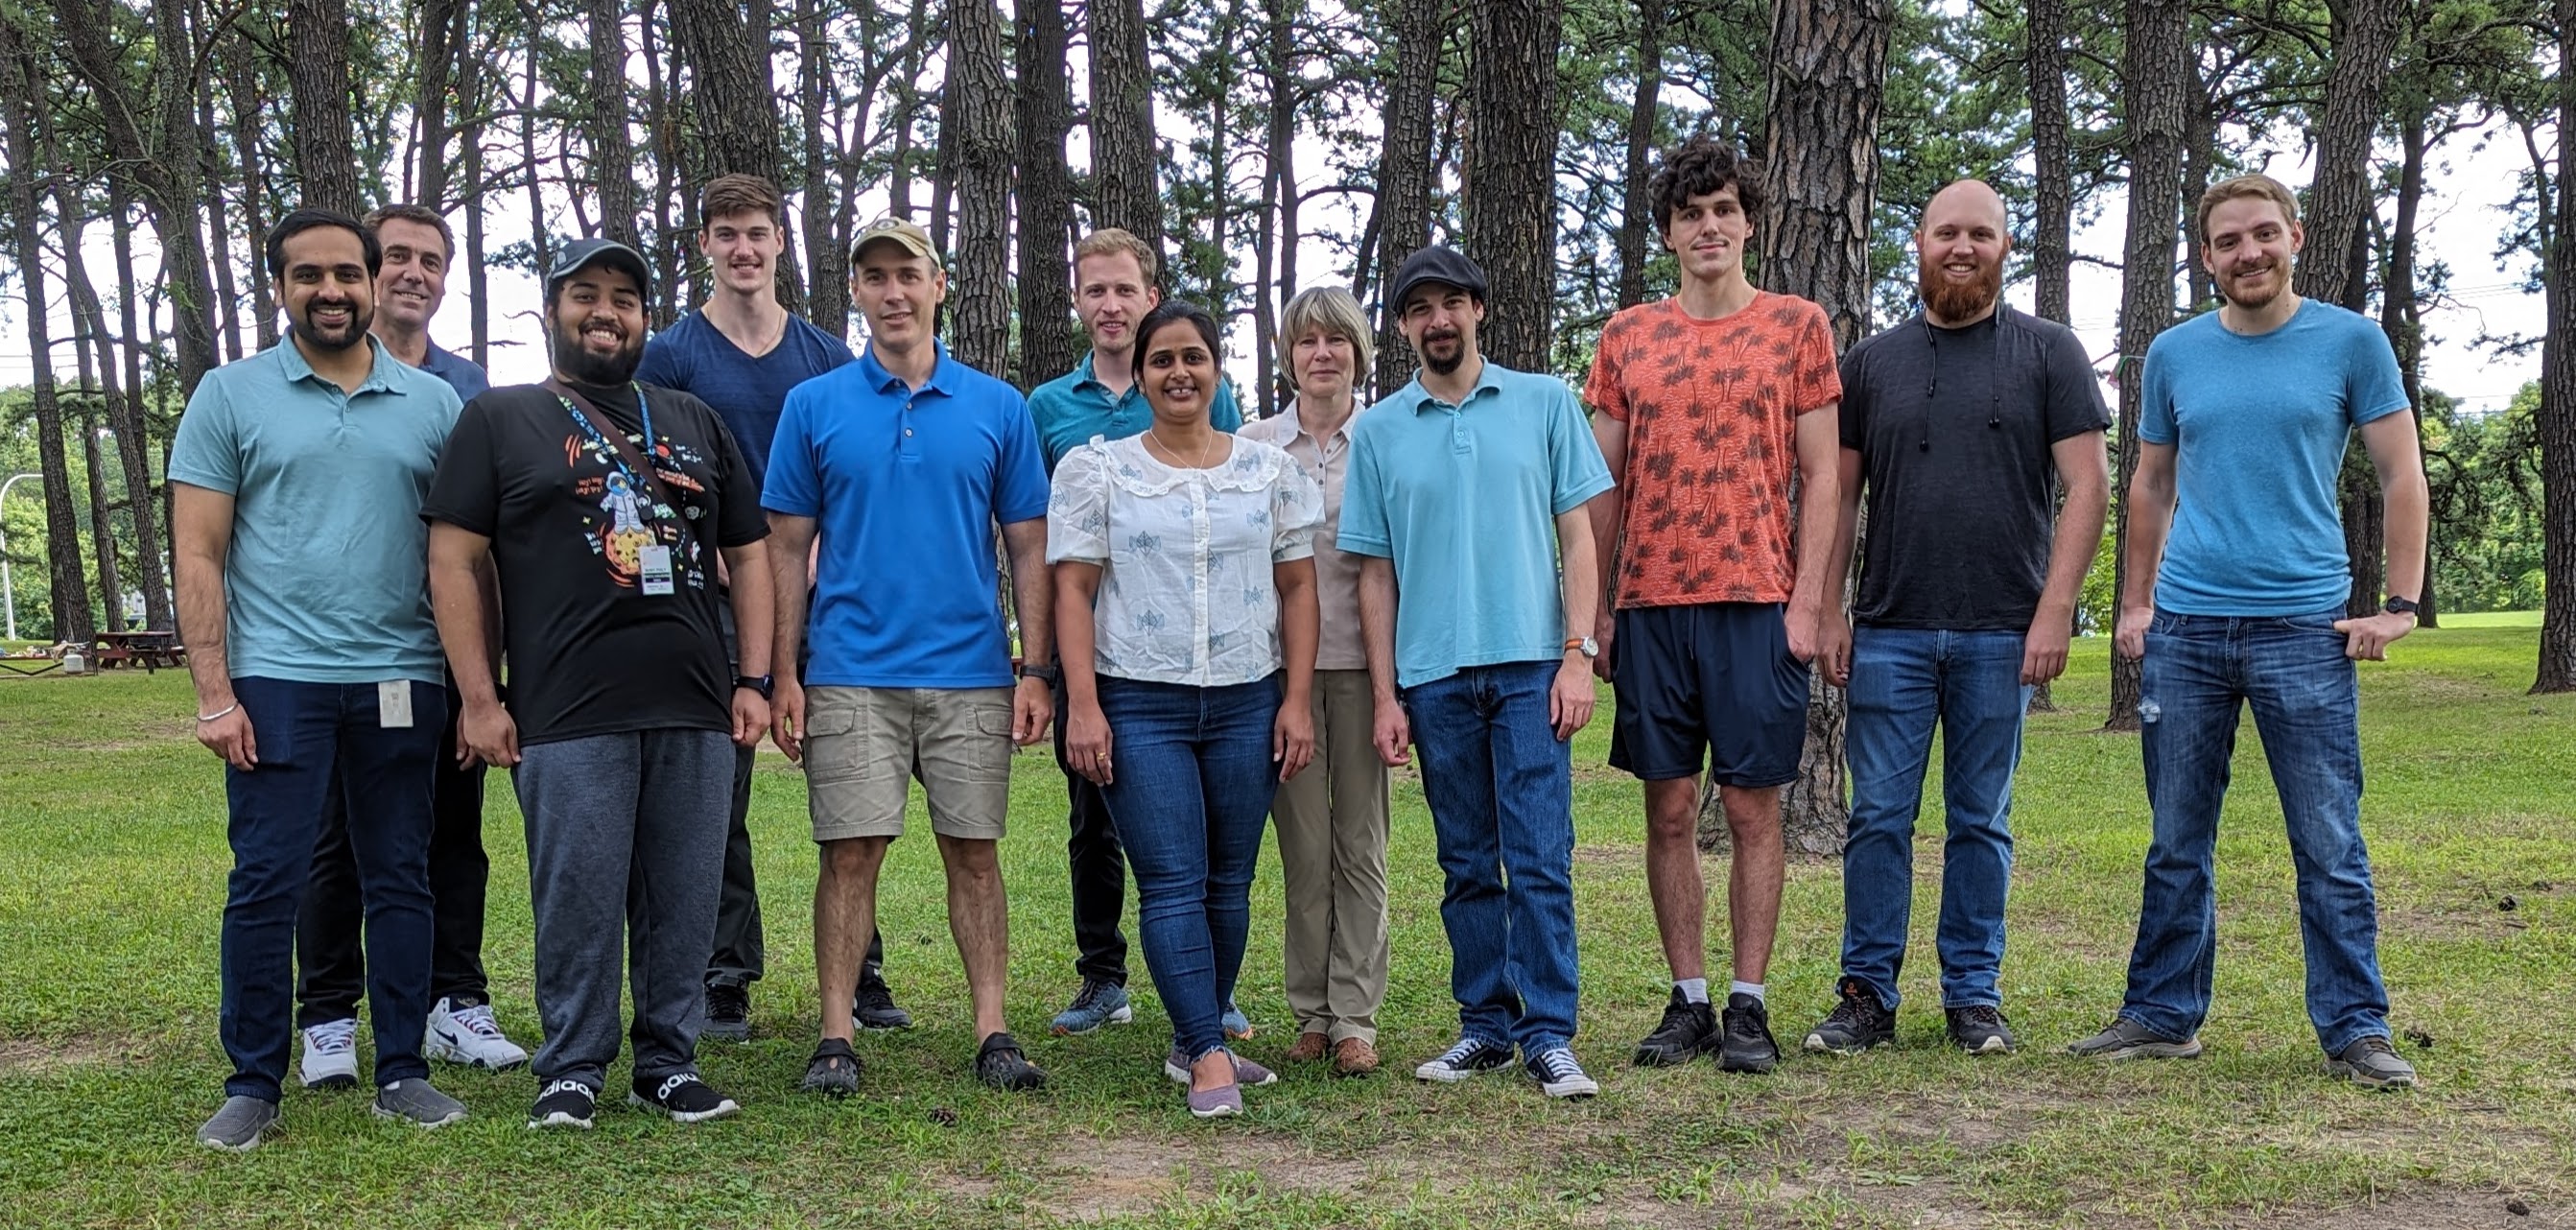 Professor Nate Cady's Research Group